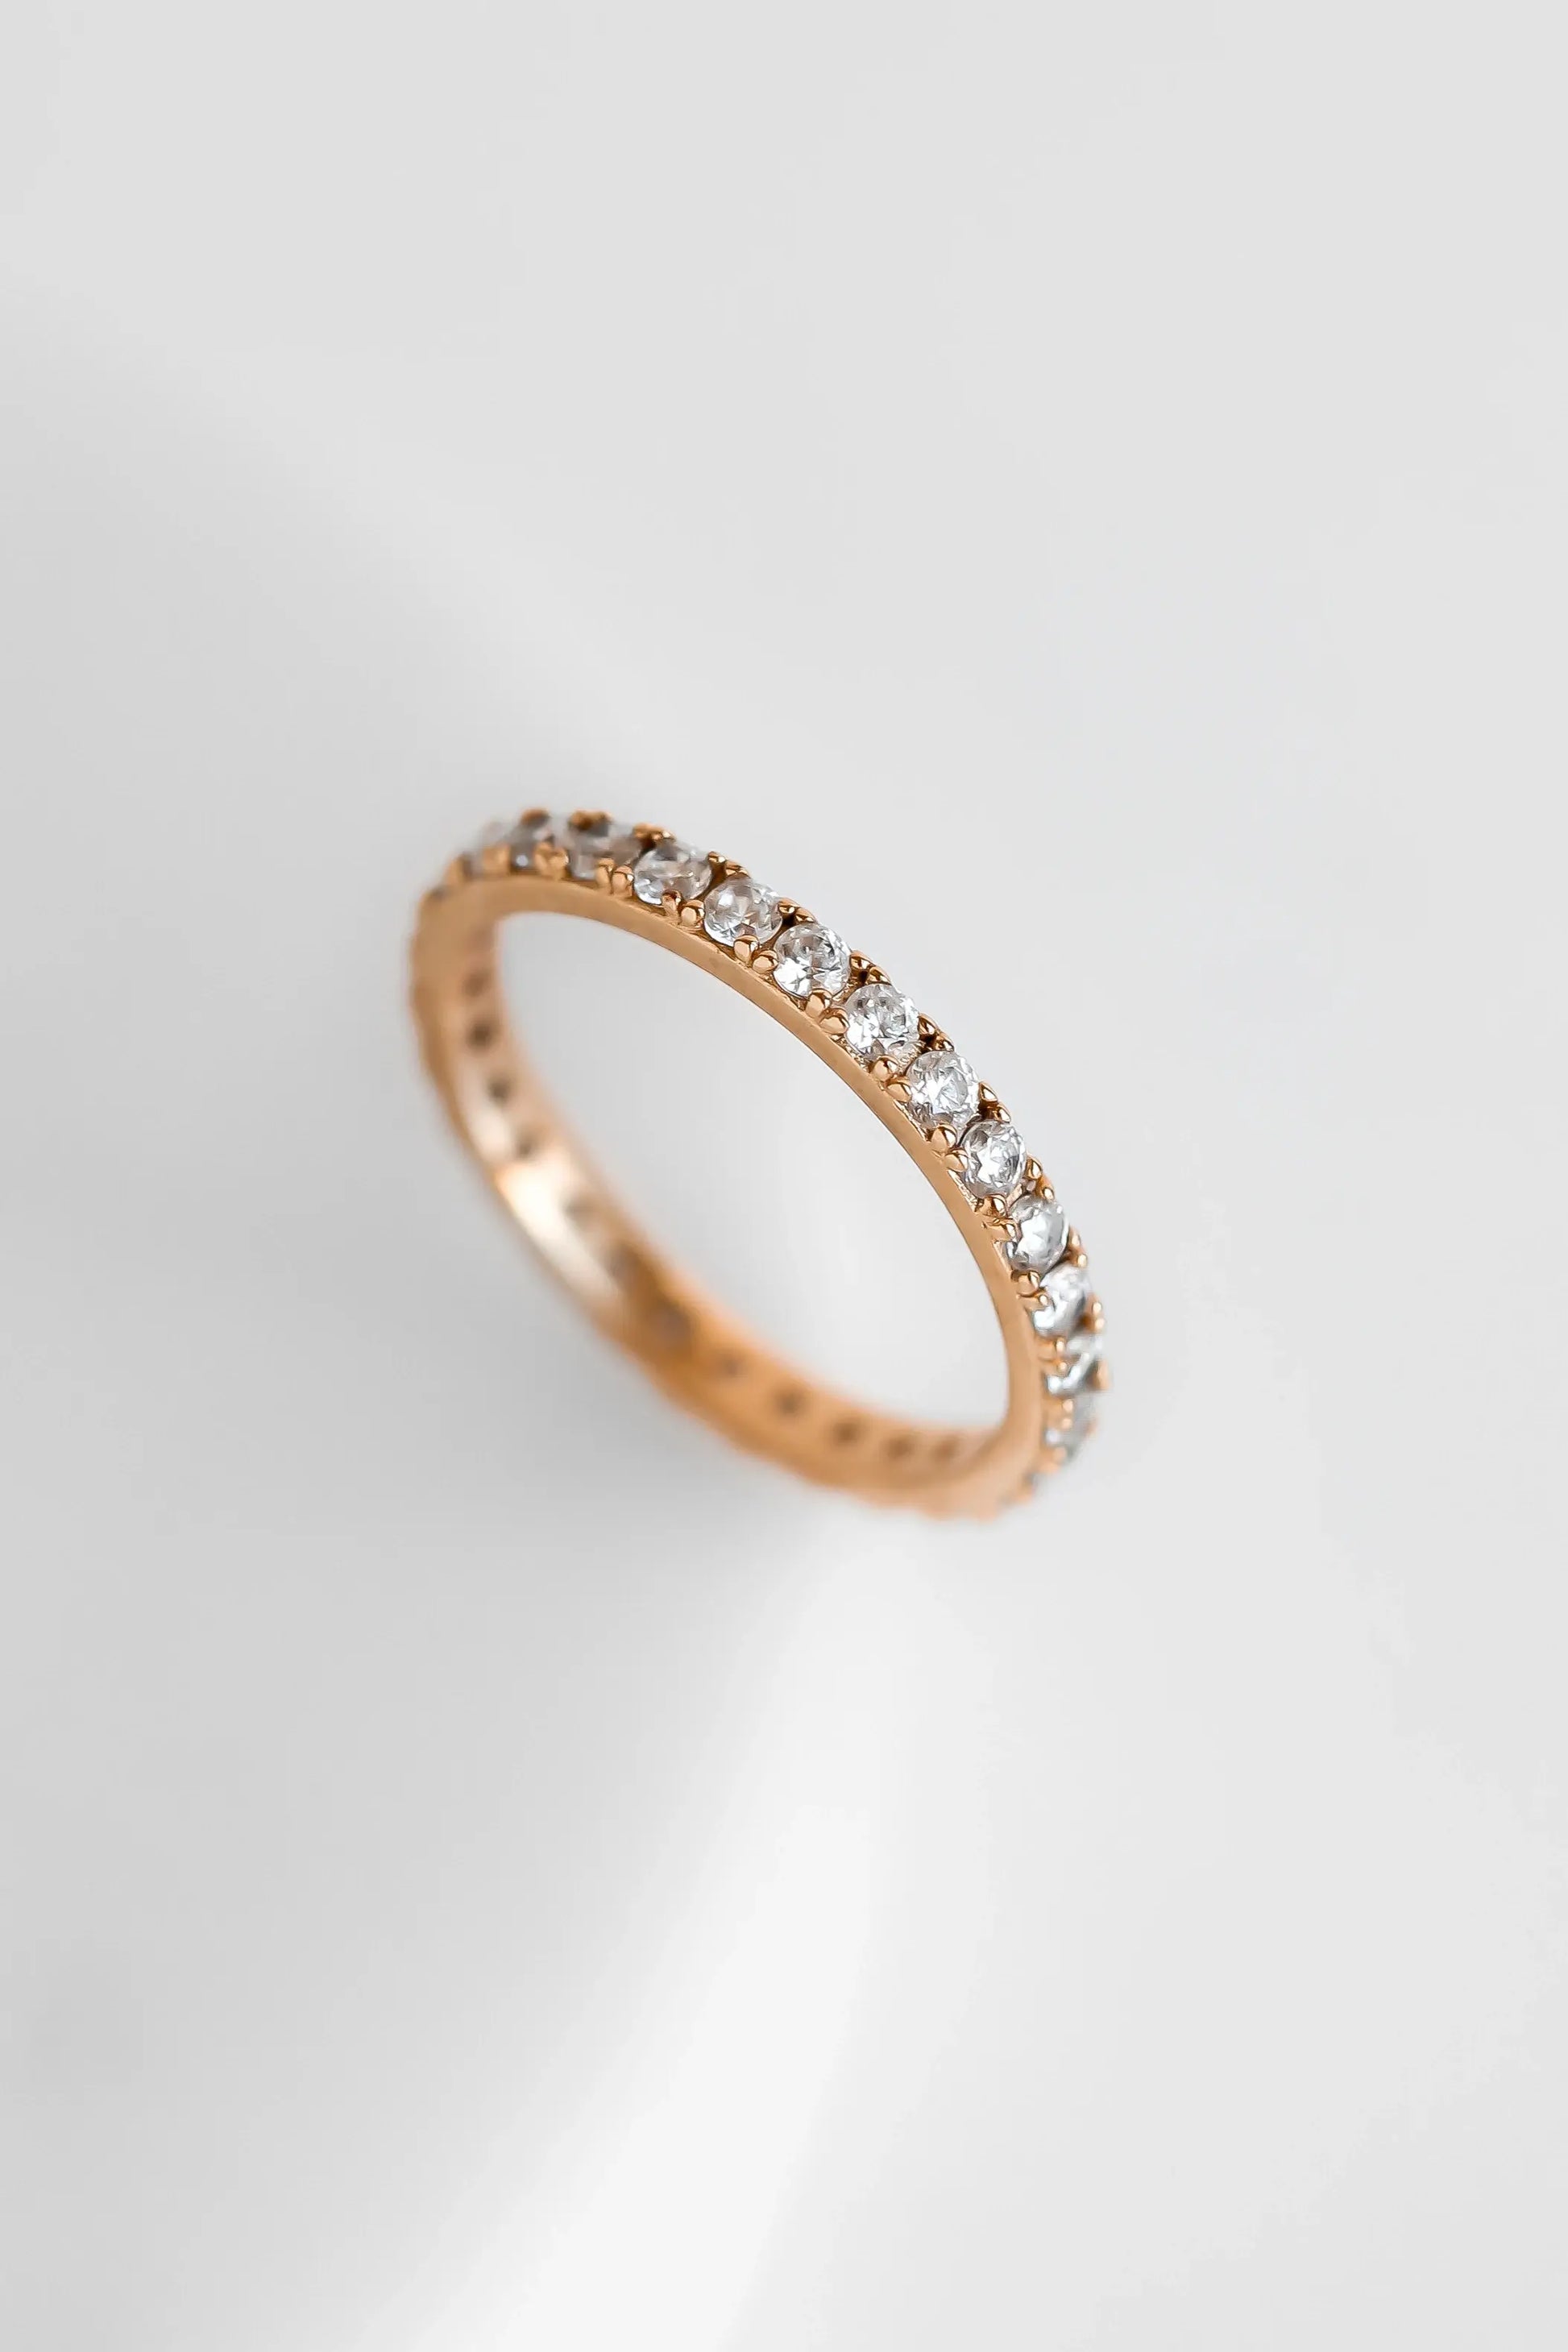 The    Charlie Band by  Francesca Jewellery from the Rings Collection.